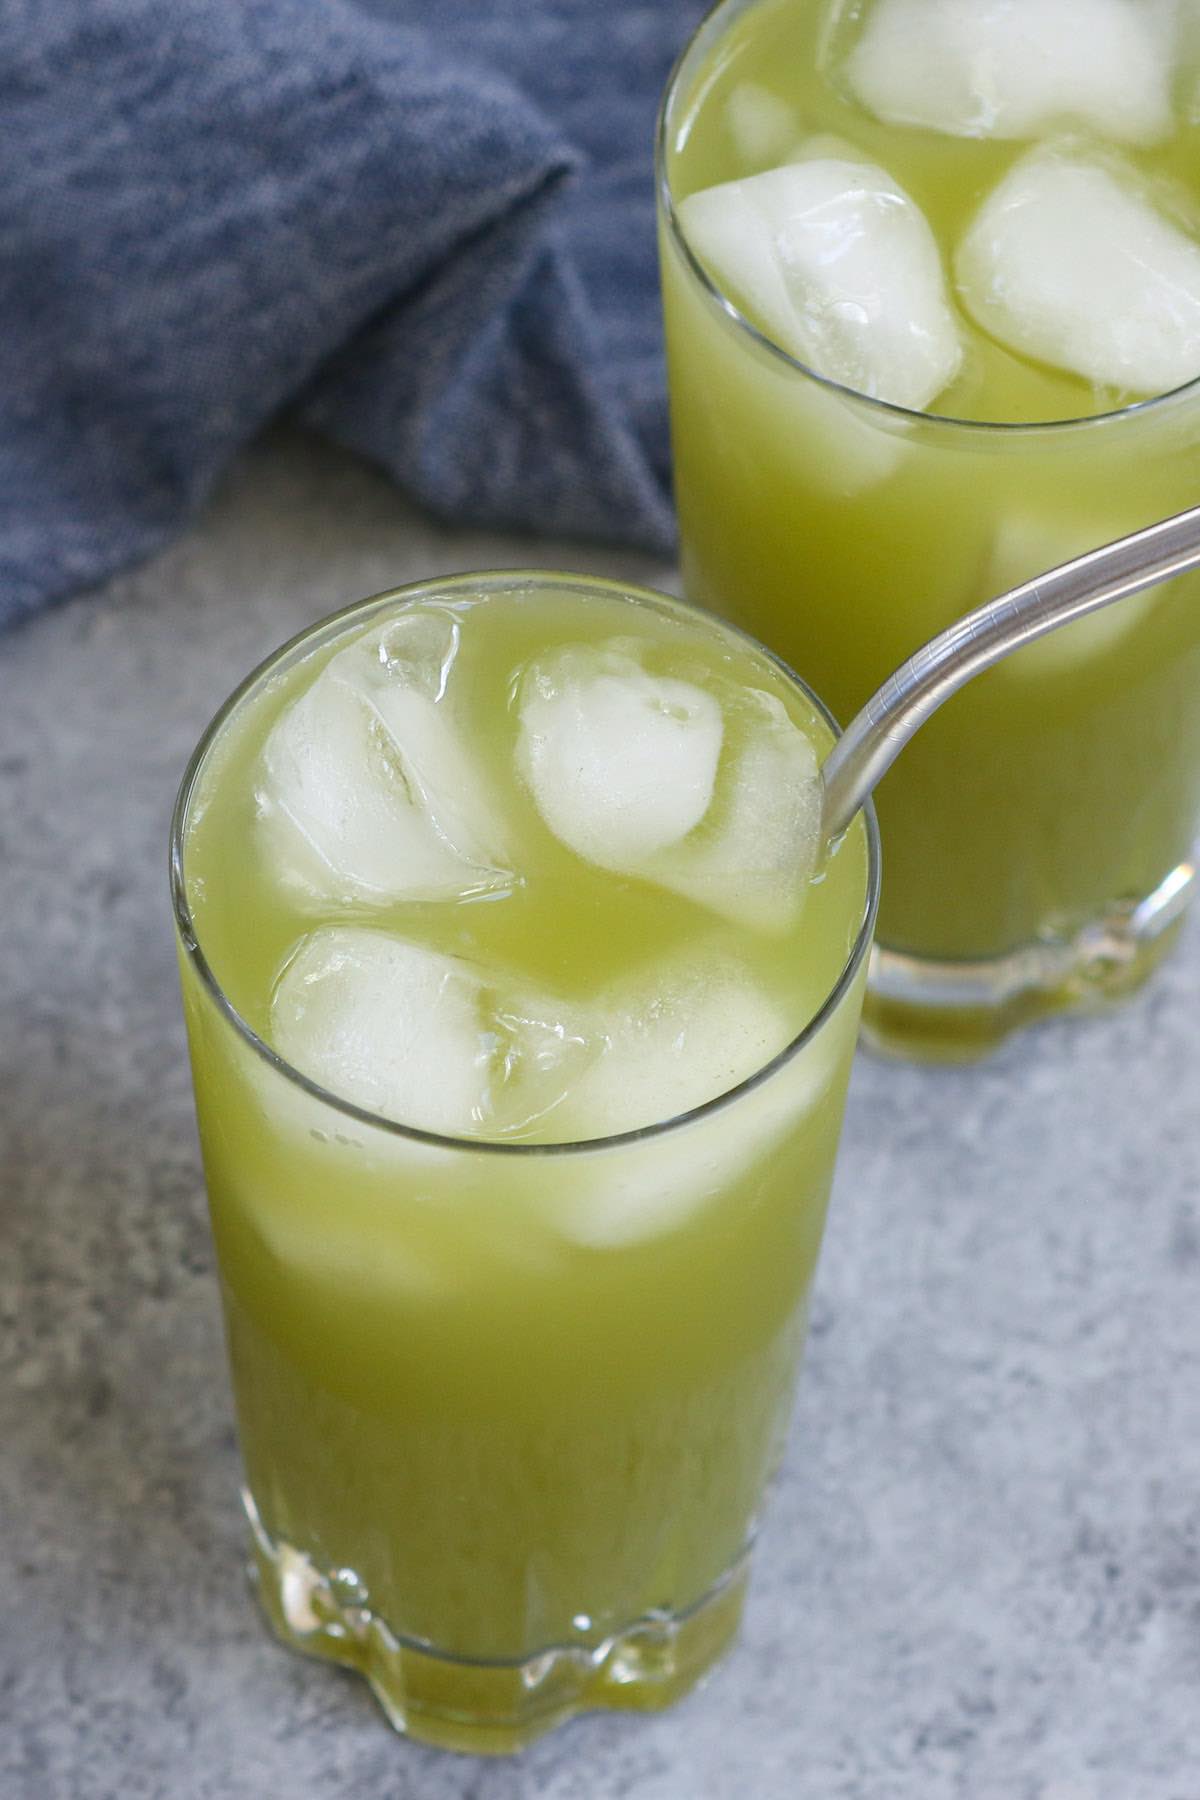 Looking to freshen up a hot summer day? Matcha Lemonade is a great way to start your day off bright. Bright green, that is. This refreshing and sweet iced matcha green tea lemonade is a copycat of the Starbucks’ favorite that’s similar to the classic Arnold Palmer drink. It’s so easy and takes a few minutes to make!